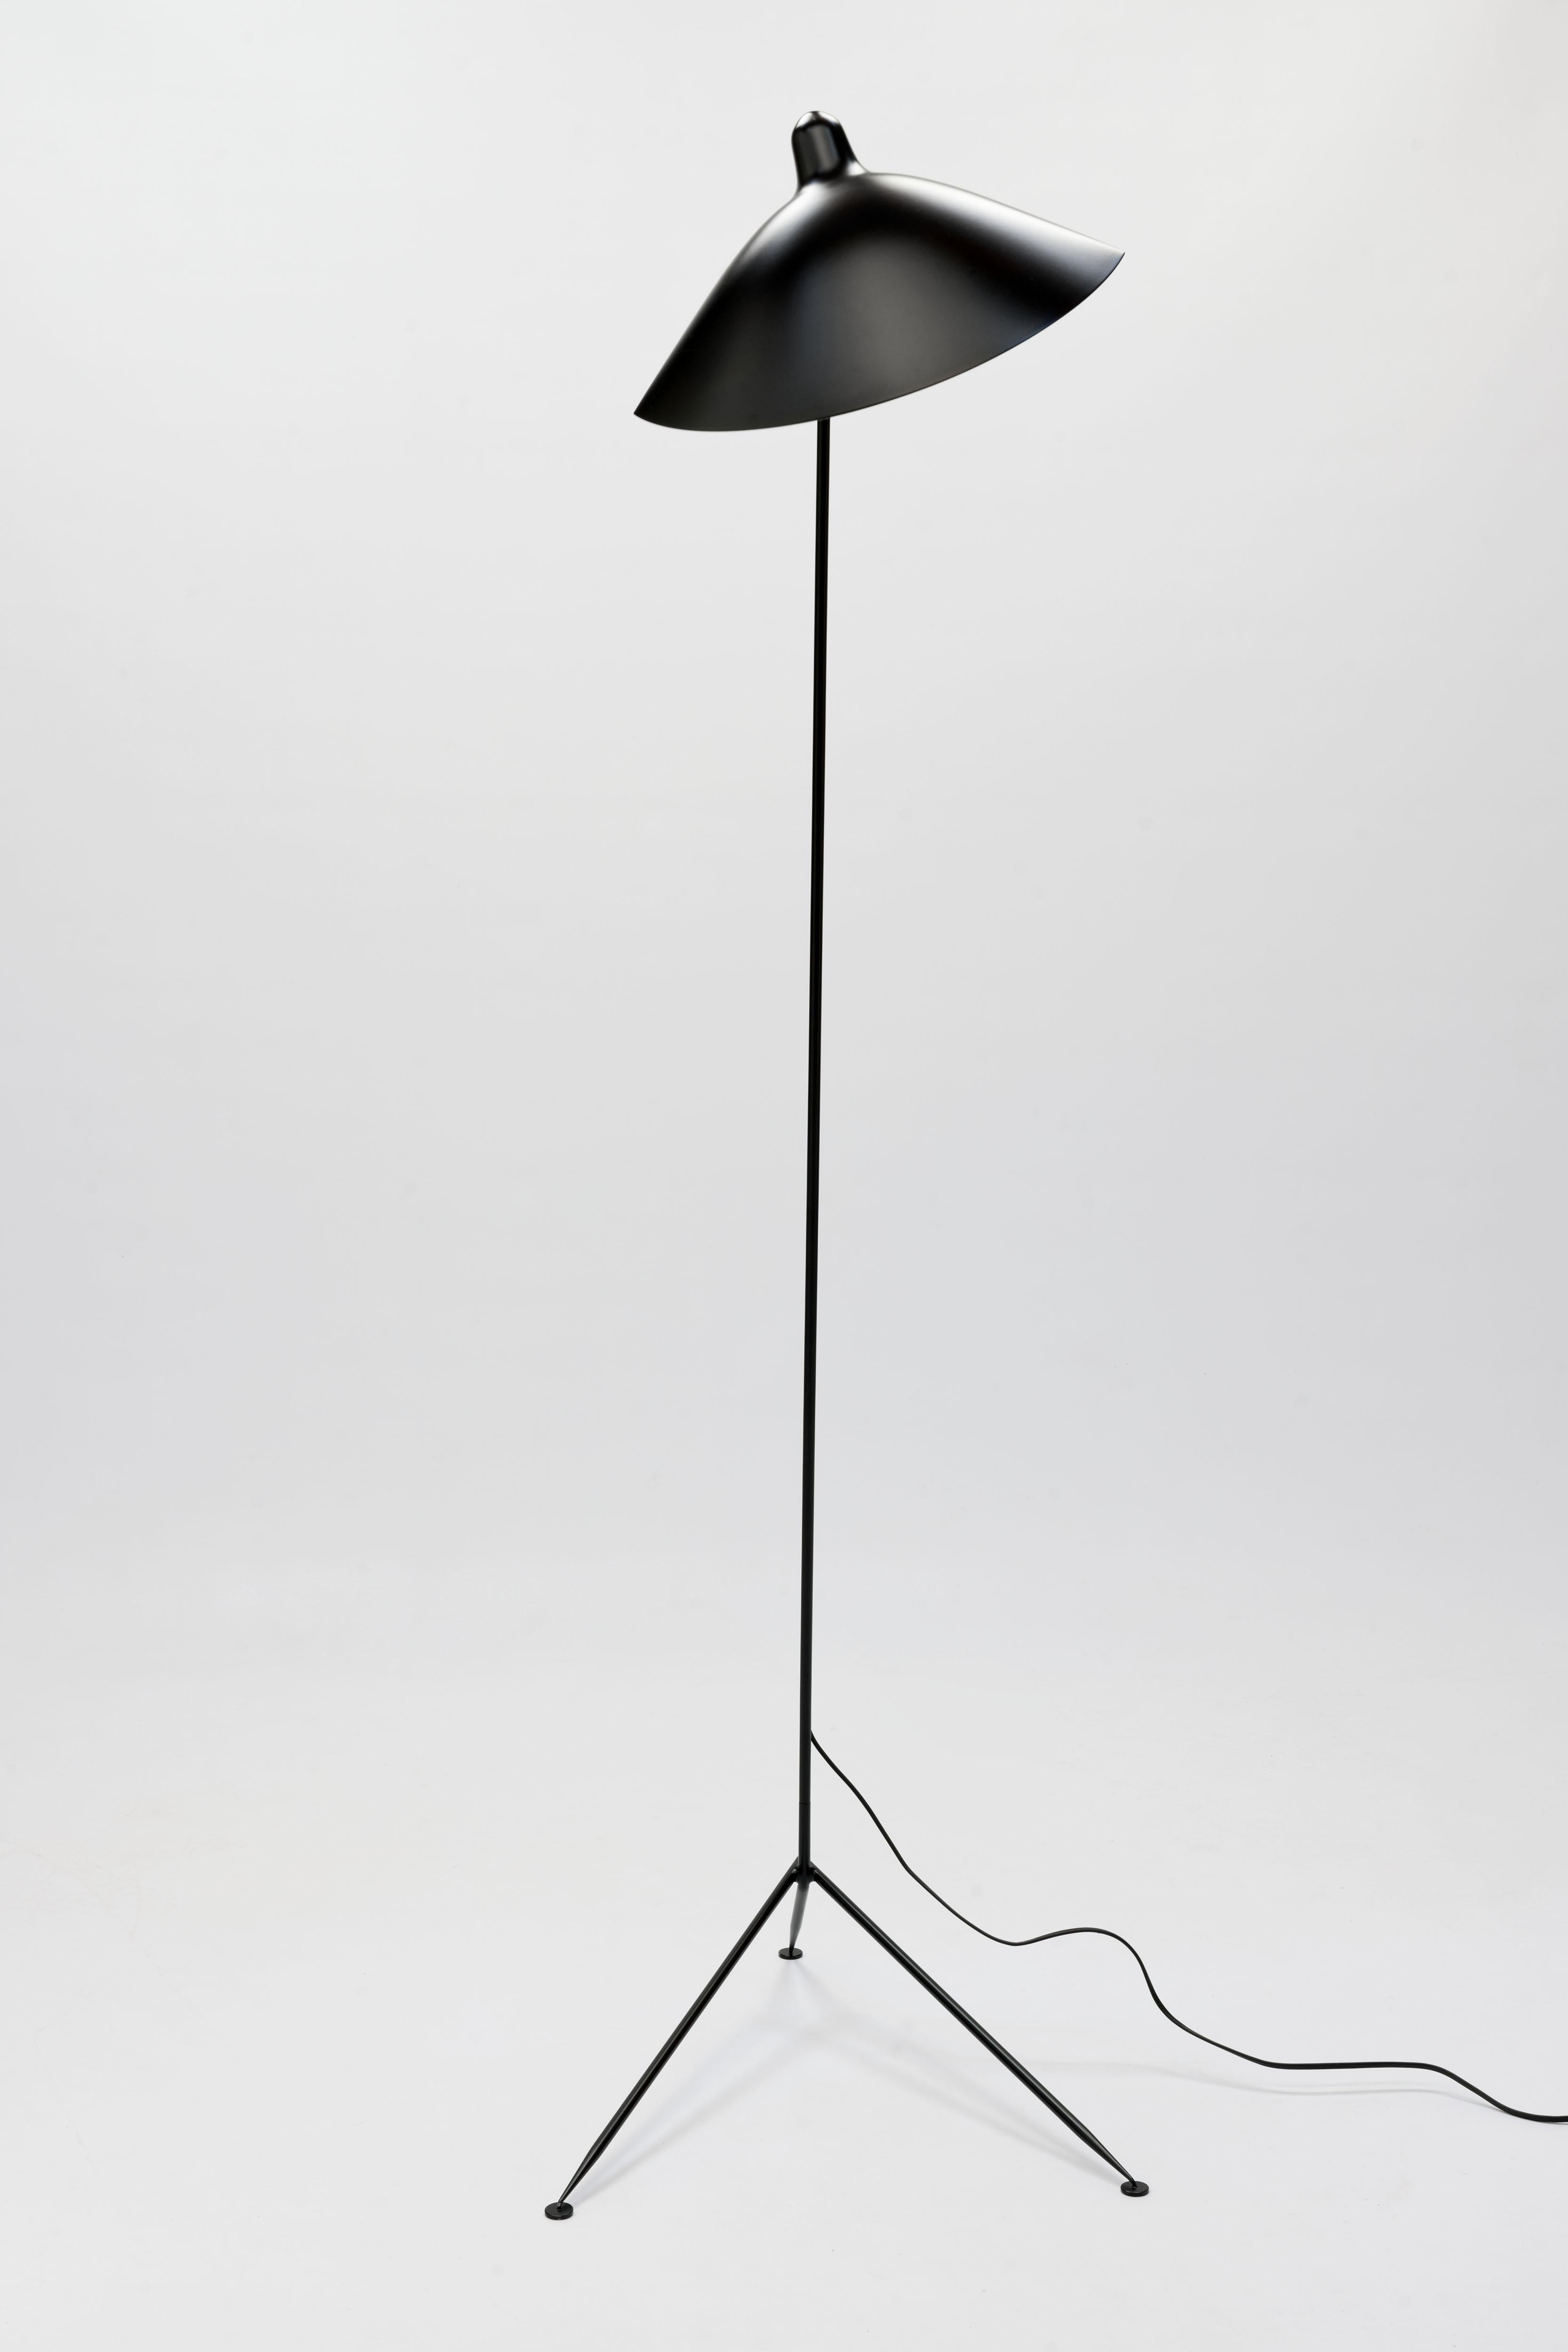 Mid-20th Century Serge Mouille 'Lampadaire Droit' Floor Lamp, Certificate Included